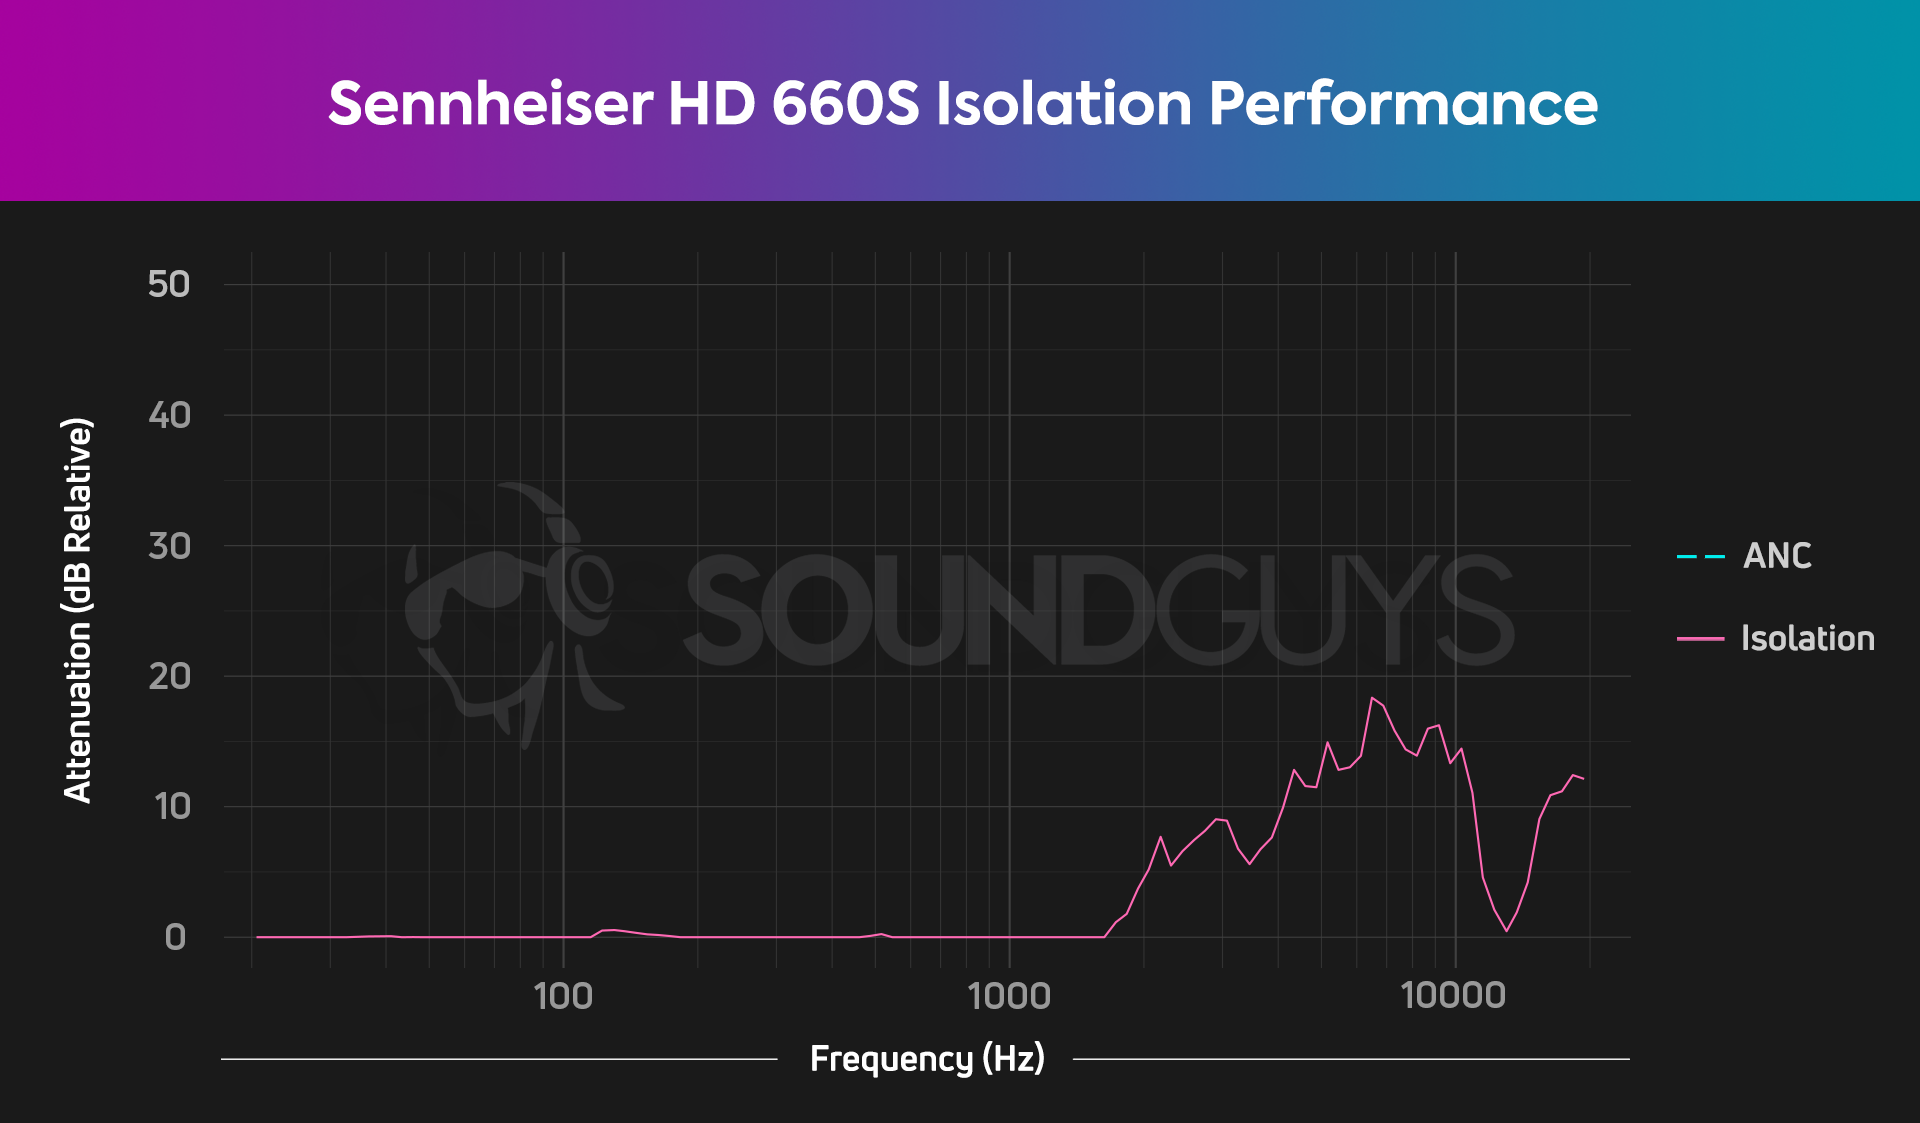 Chart showing the minimal isolaton provided by the Sennheiser HD 660S